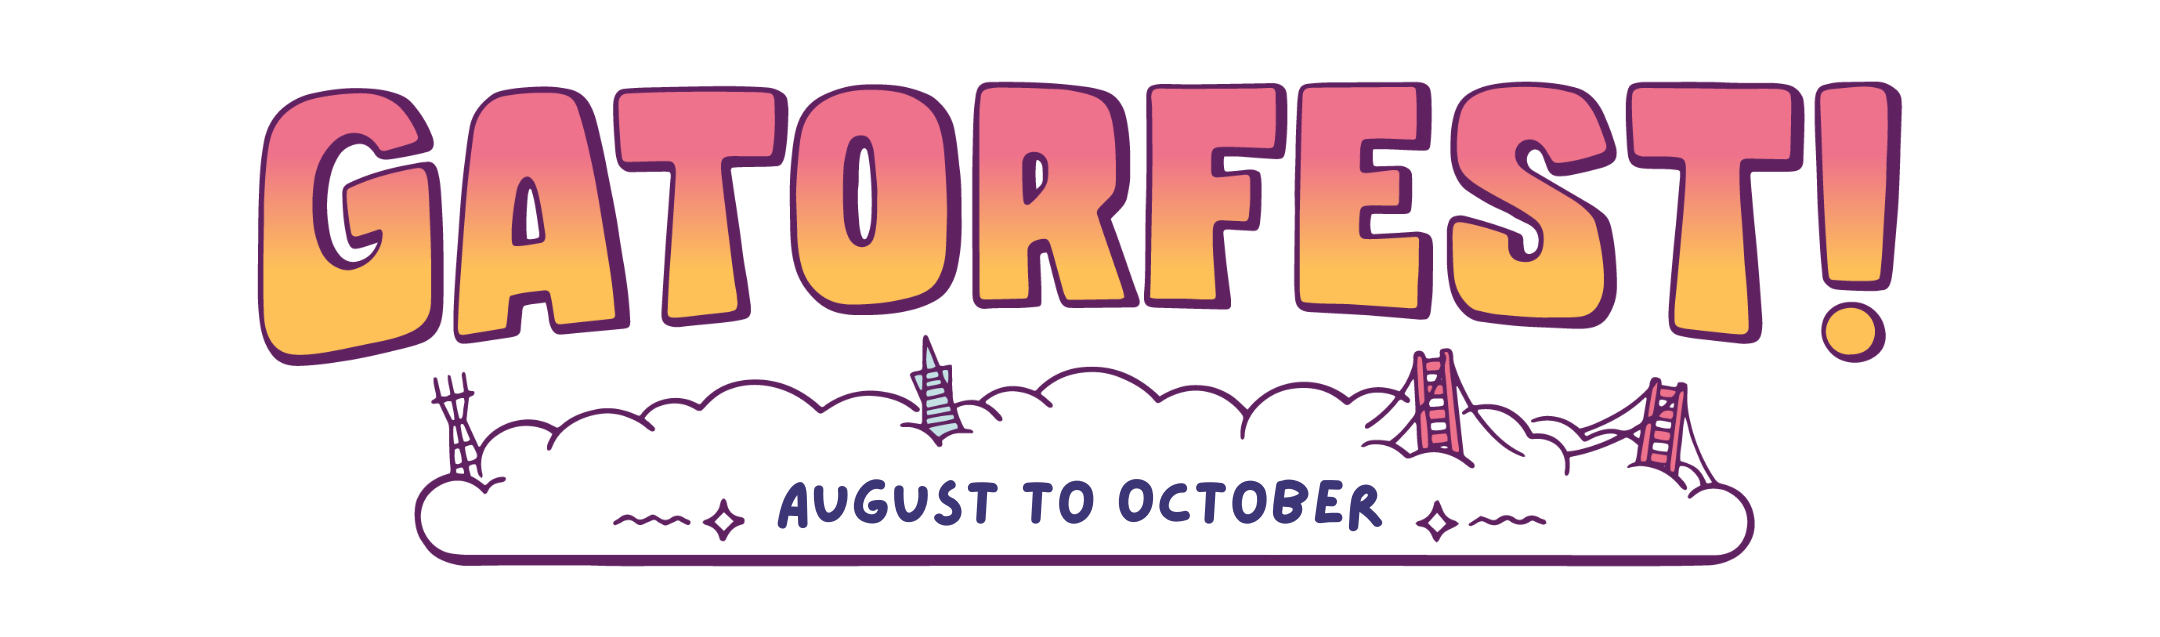 GatorFest is August to October